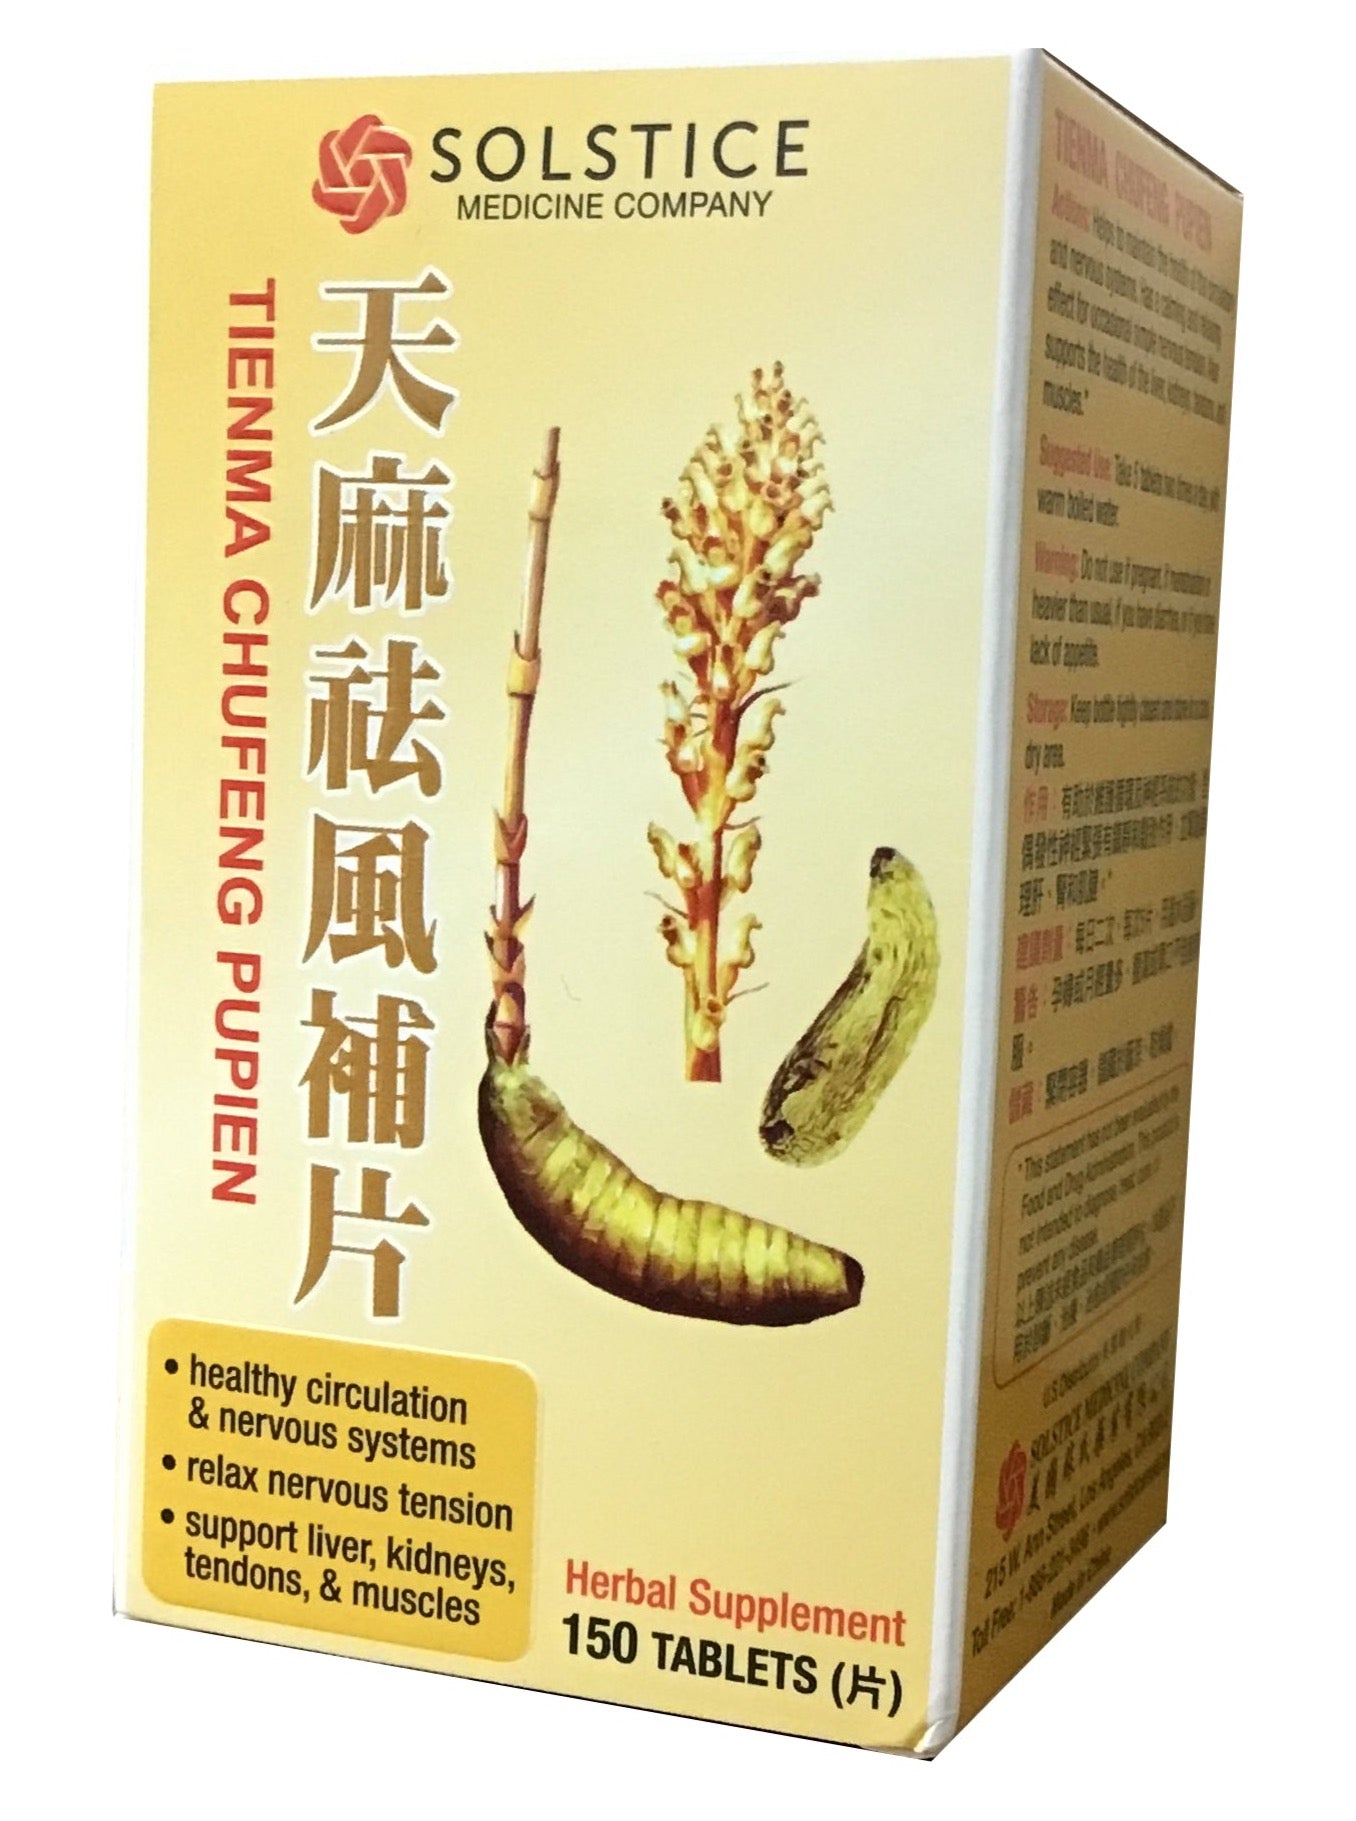 Tienma Chufeng Pupien 天麻祛風補片 (150 Tablets)